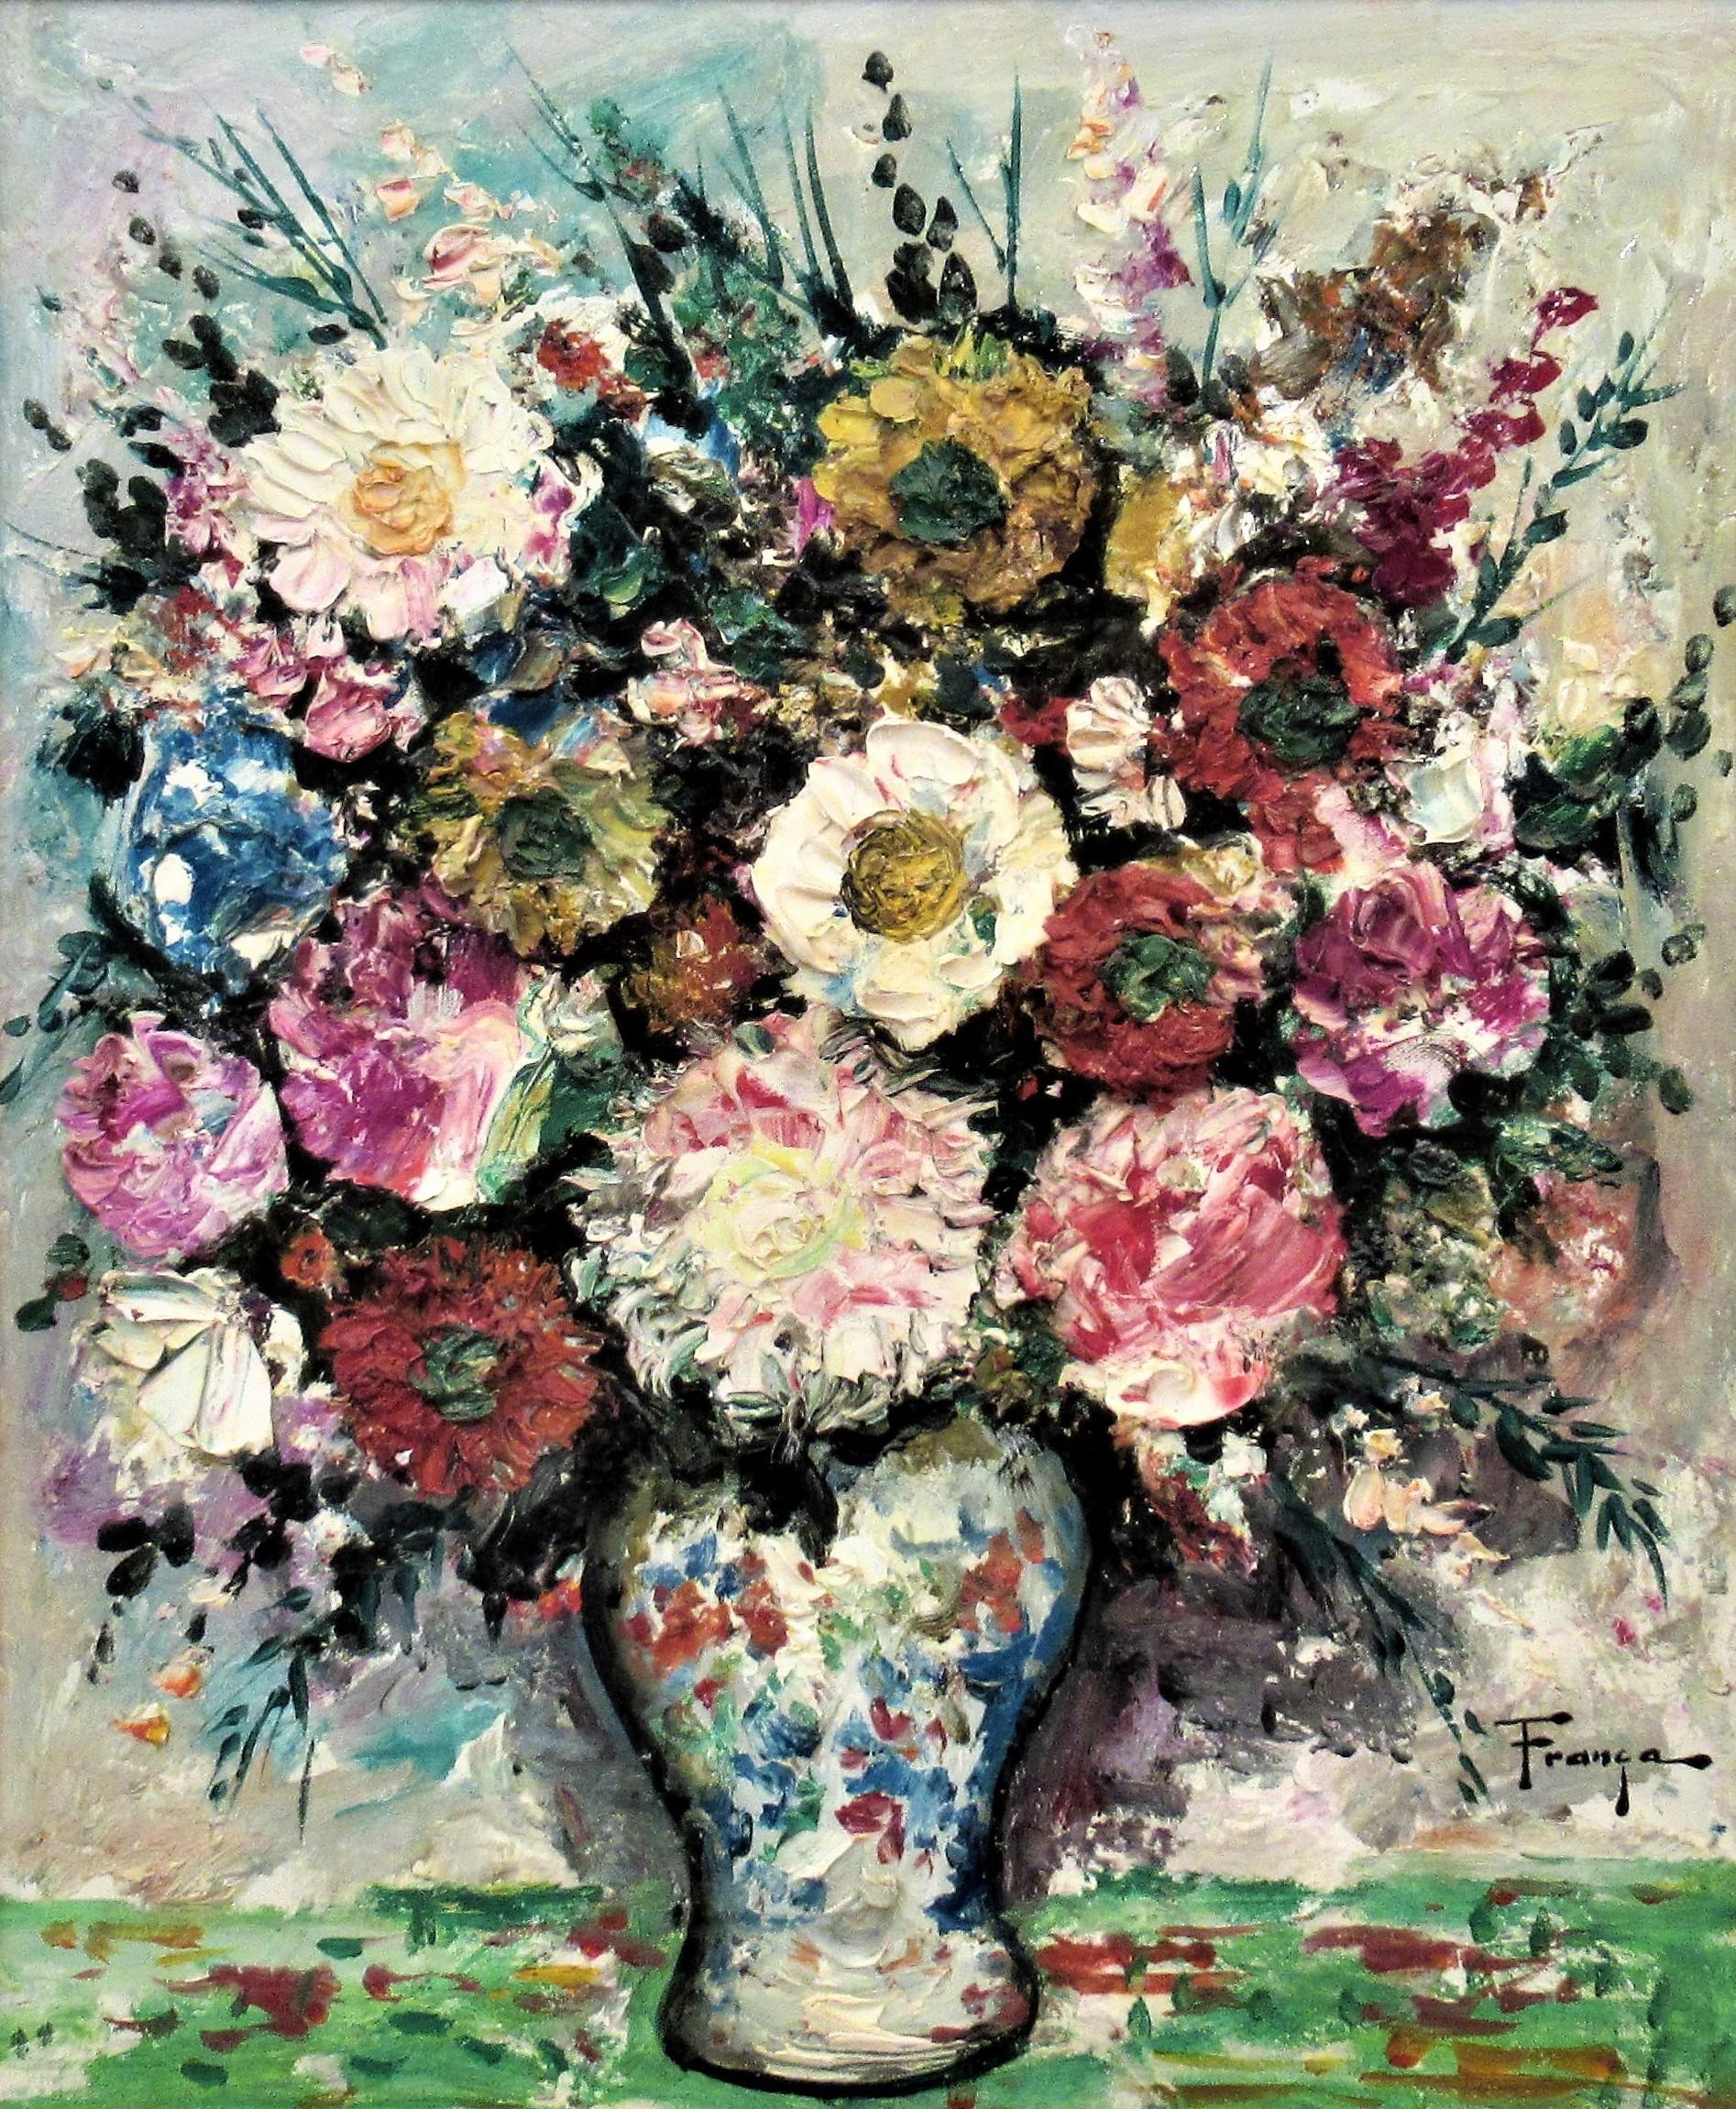 Still life Flowers in a Vase - Painting by Ozz Franca